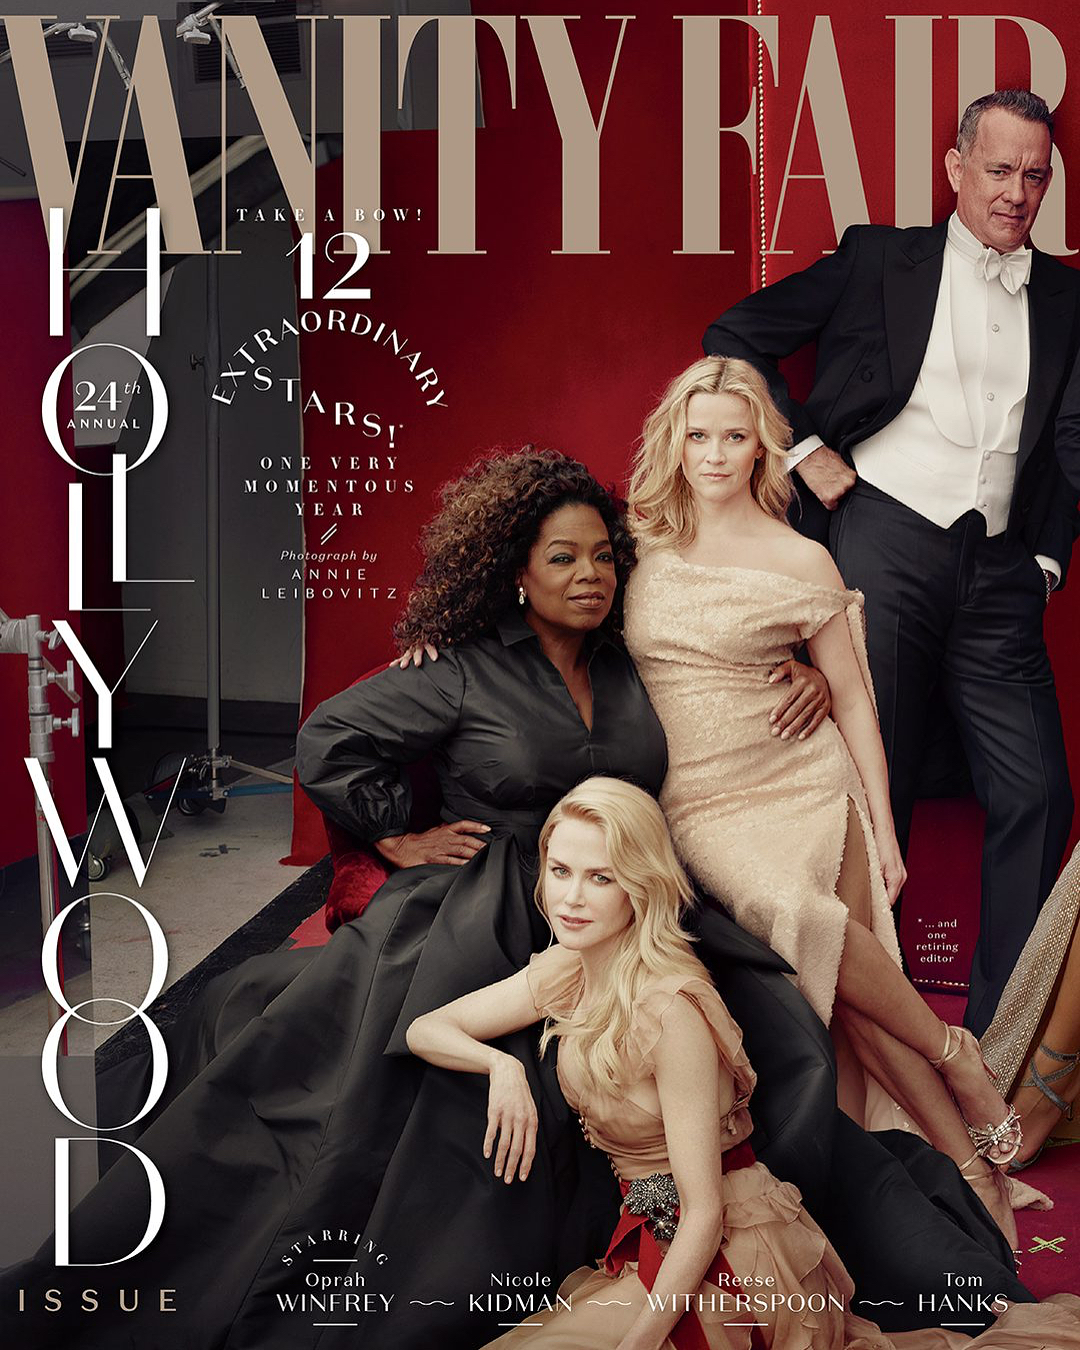 Reese Witherspoon And Oprah Winfrey Share What Keeps Them Going As Actors